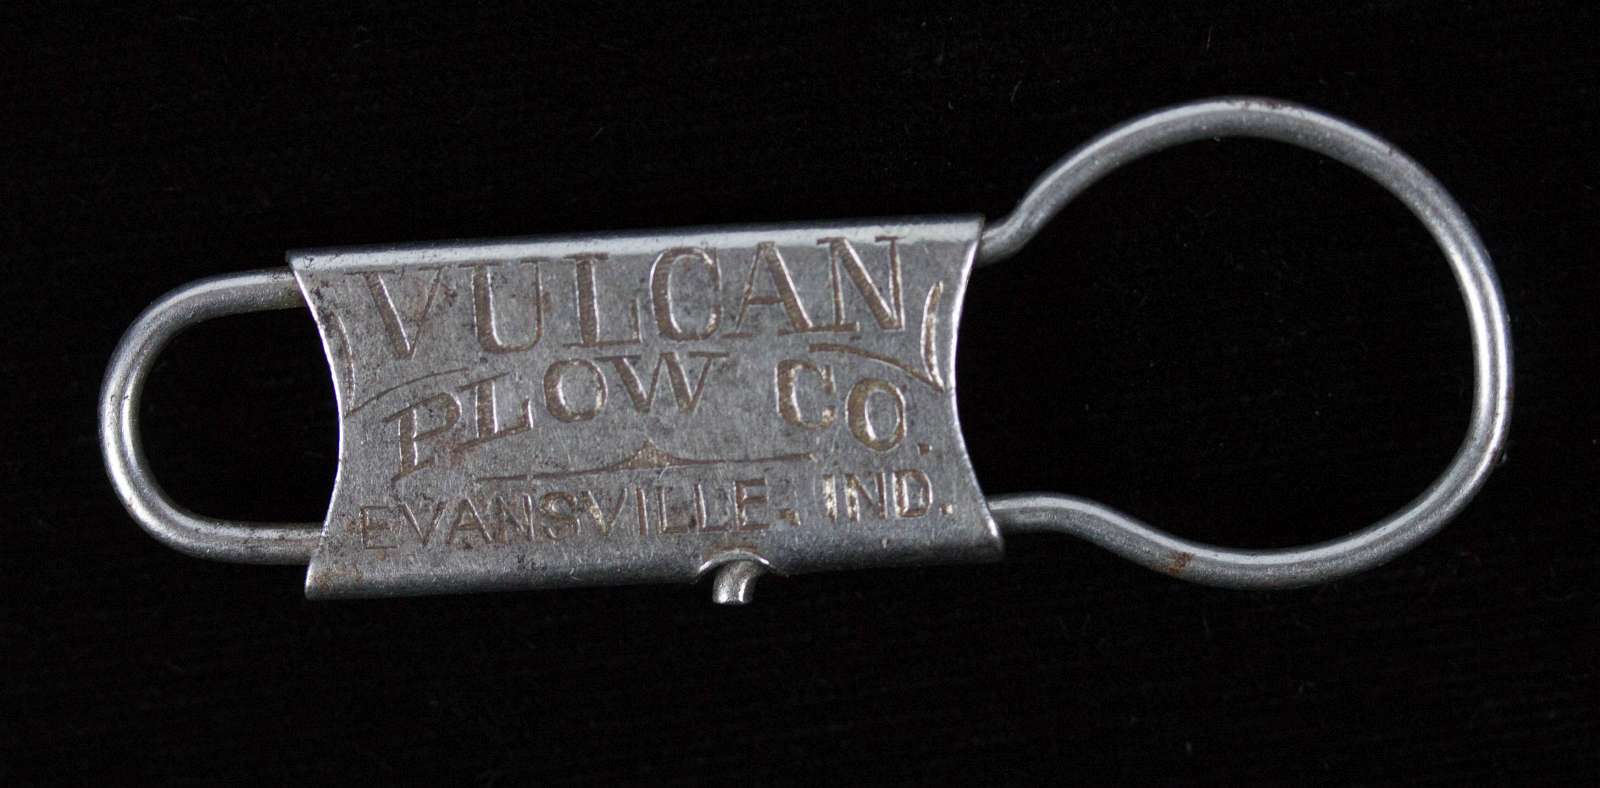 VULCAN CHILLED PLOW COMPANY ADVERTISING FOB